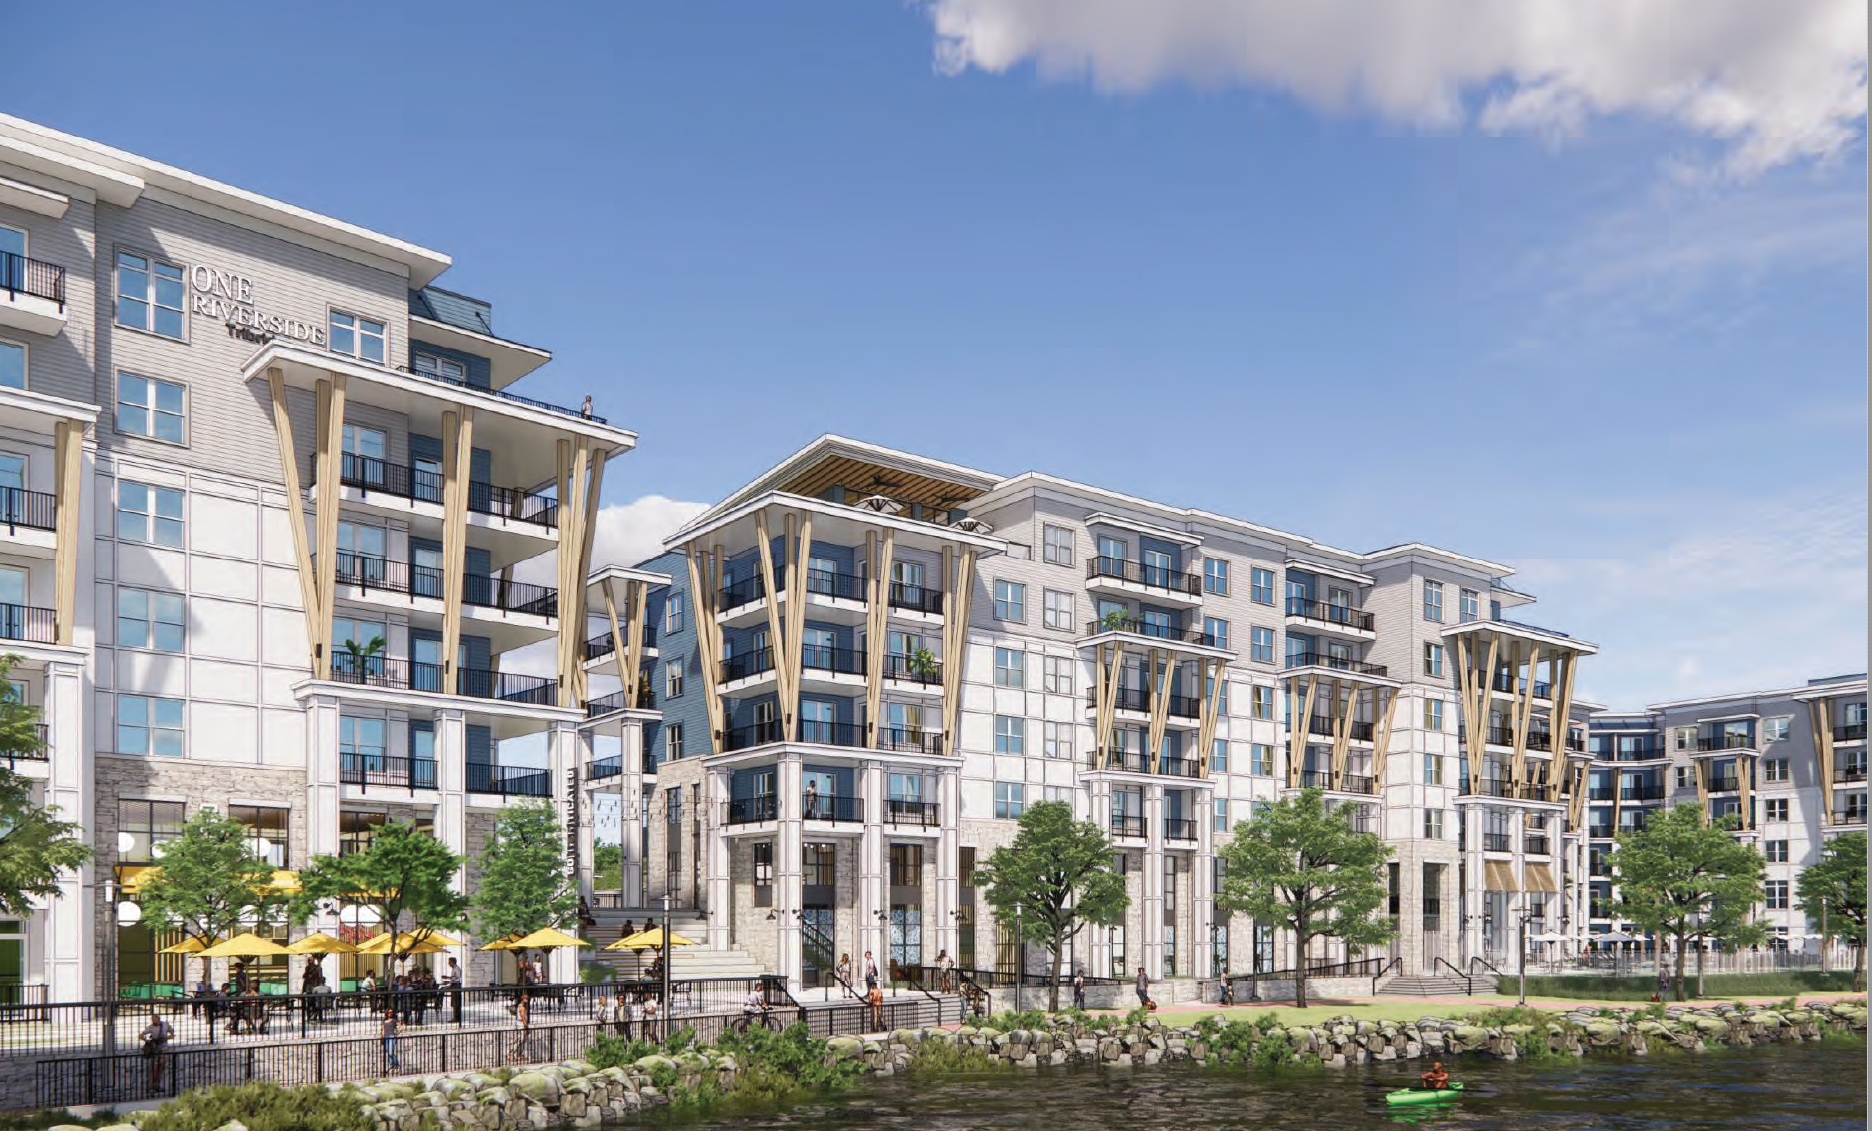 The  first phase of the $250 million One Riverside project include Whole Foods Market, 270 multifamily units, a riverfront restaurant, retail and structured parking.